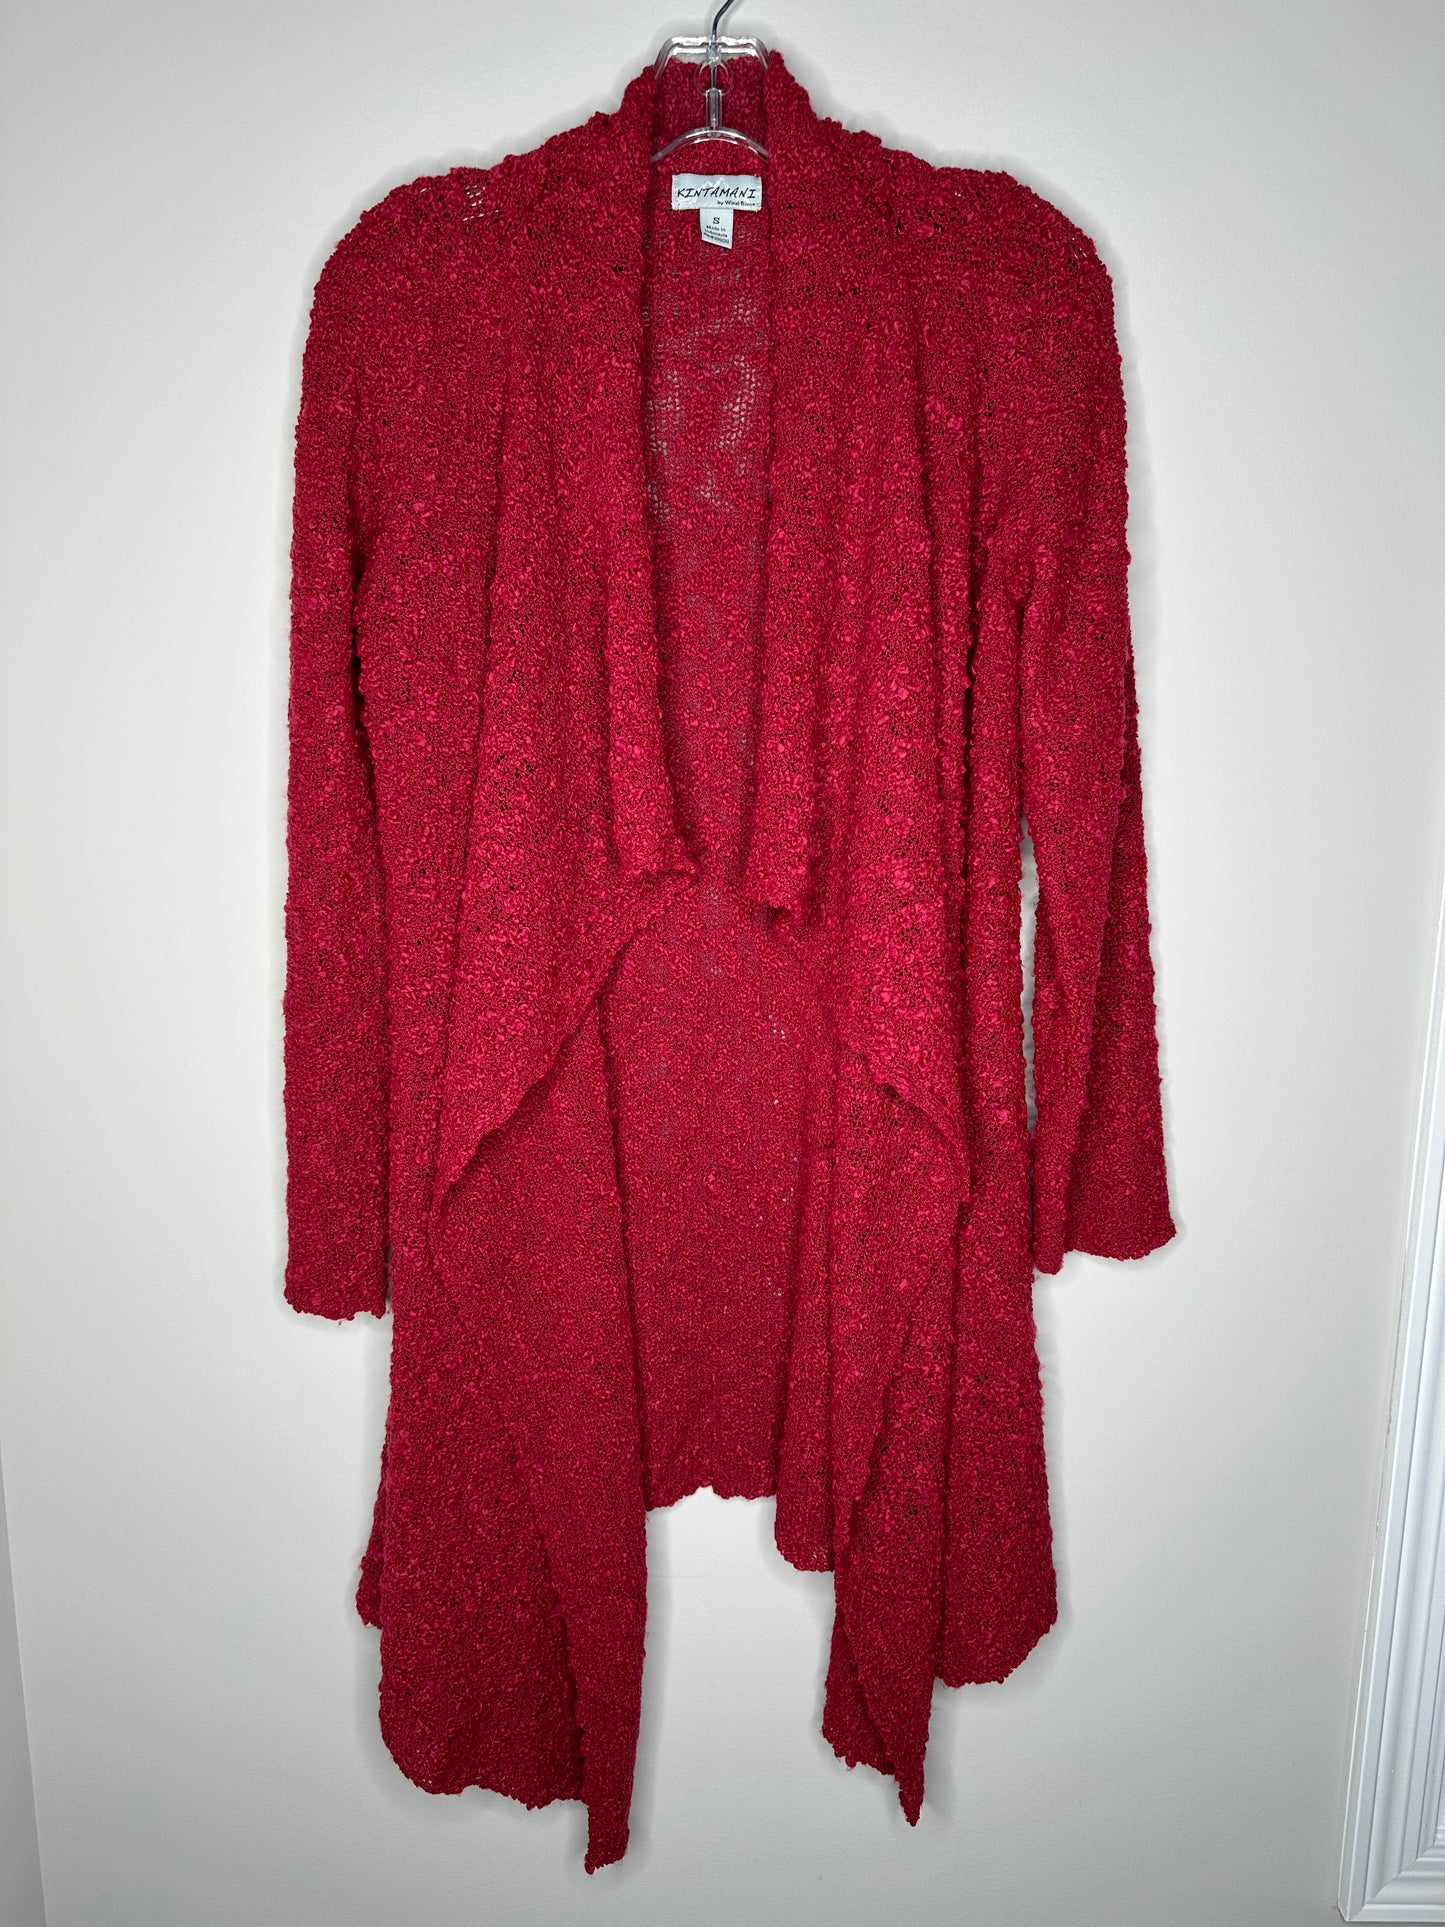 KINTAMANI by Wind River Size S Dark Red Maroon Chunky Boucle Knit Open Cardigan Sweater